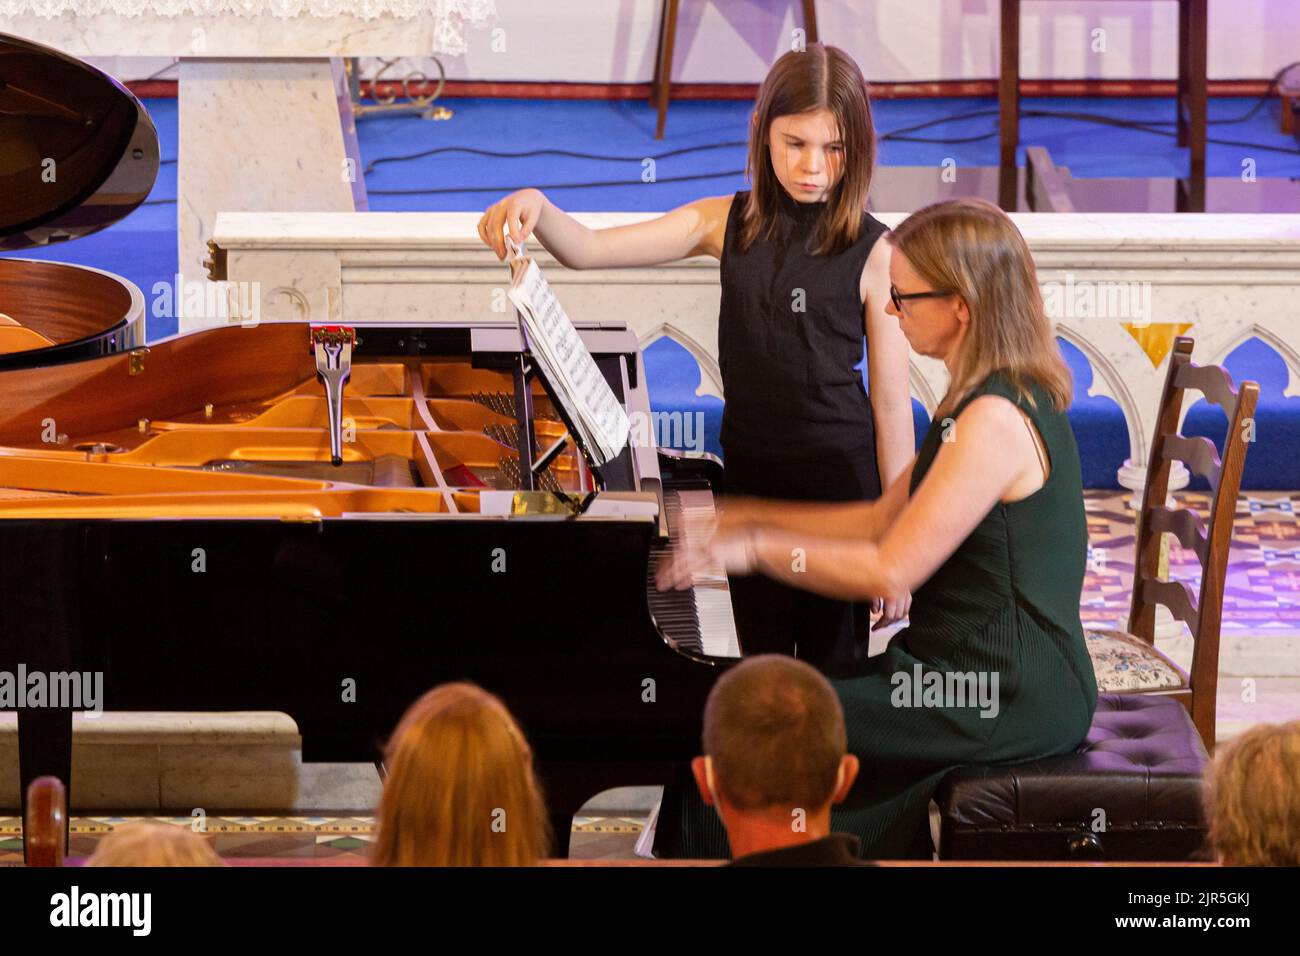 Two Piano Concert in a Church. Valentia Island, County Kerry, Ireland Stock Photo